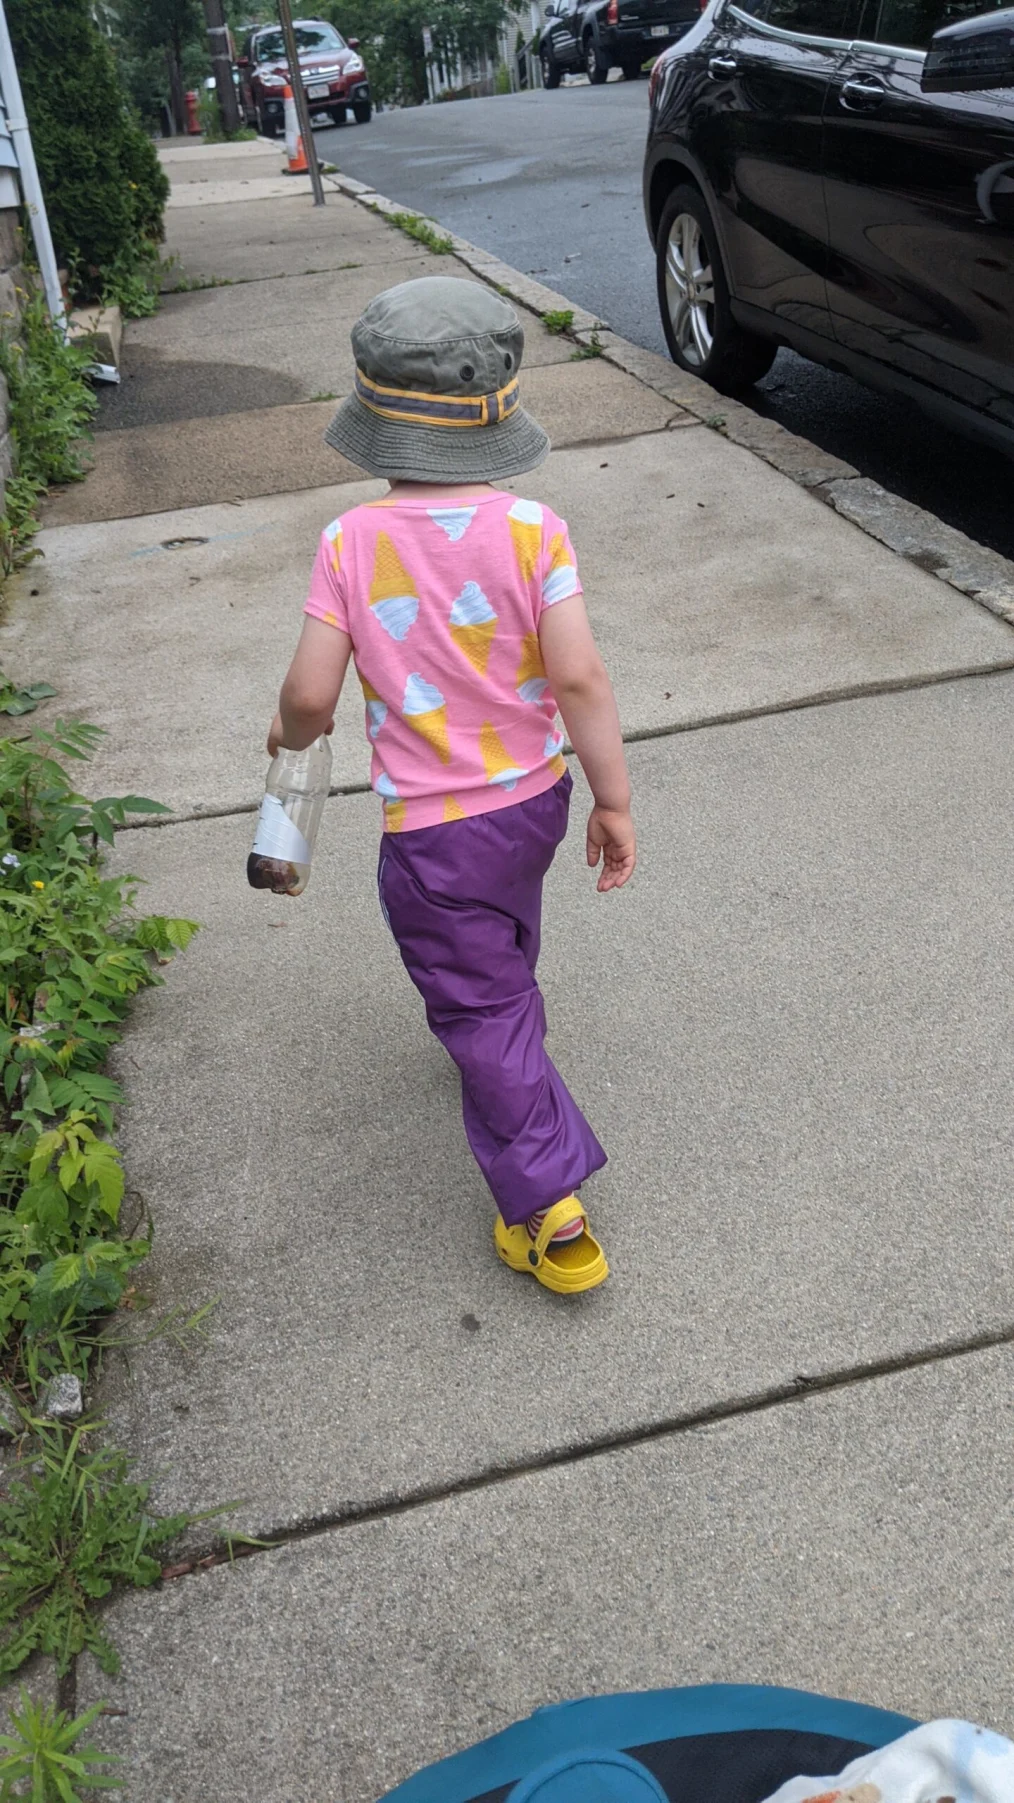 A toddler walks ahead of her mom, wearing a pink shirt on and a bucket hat.